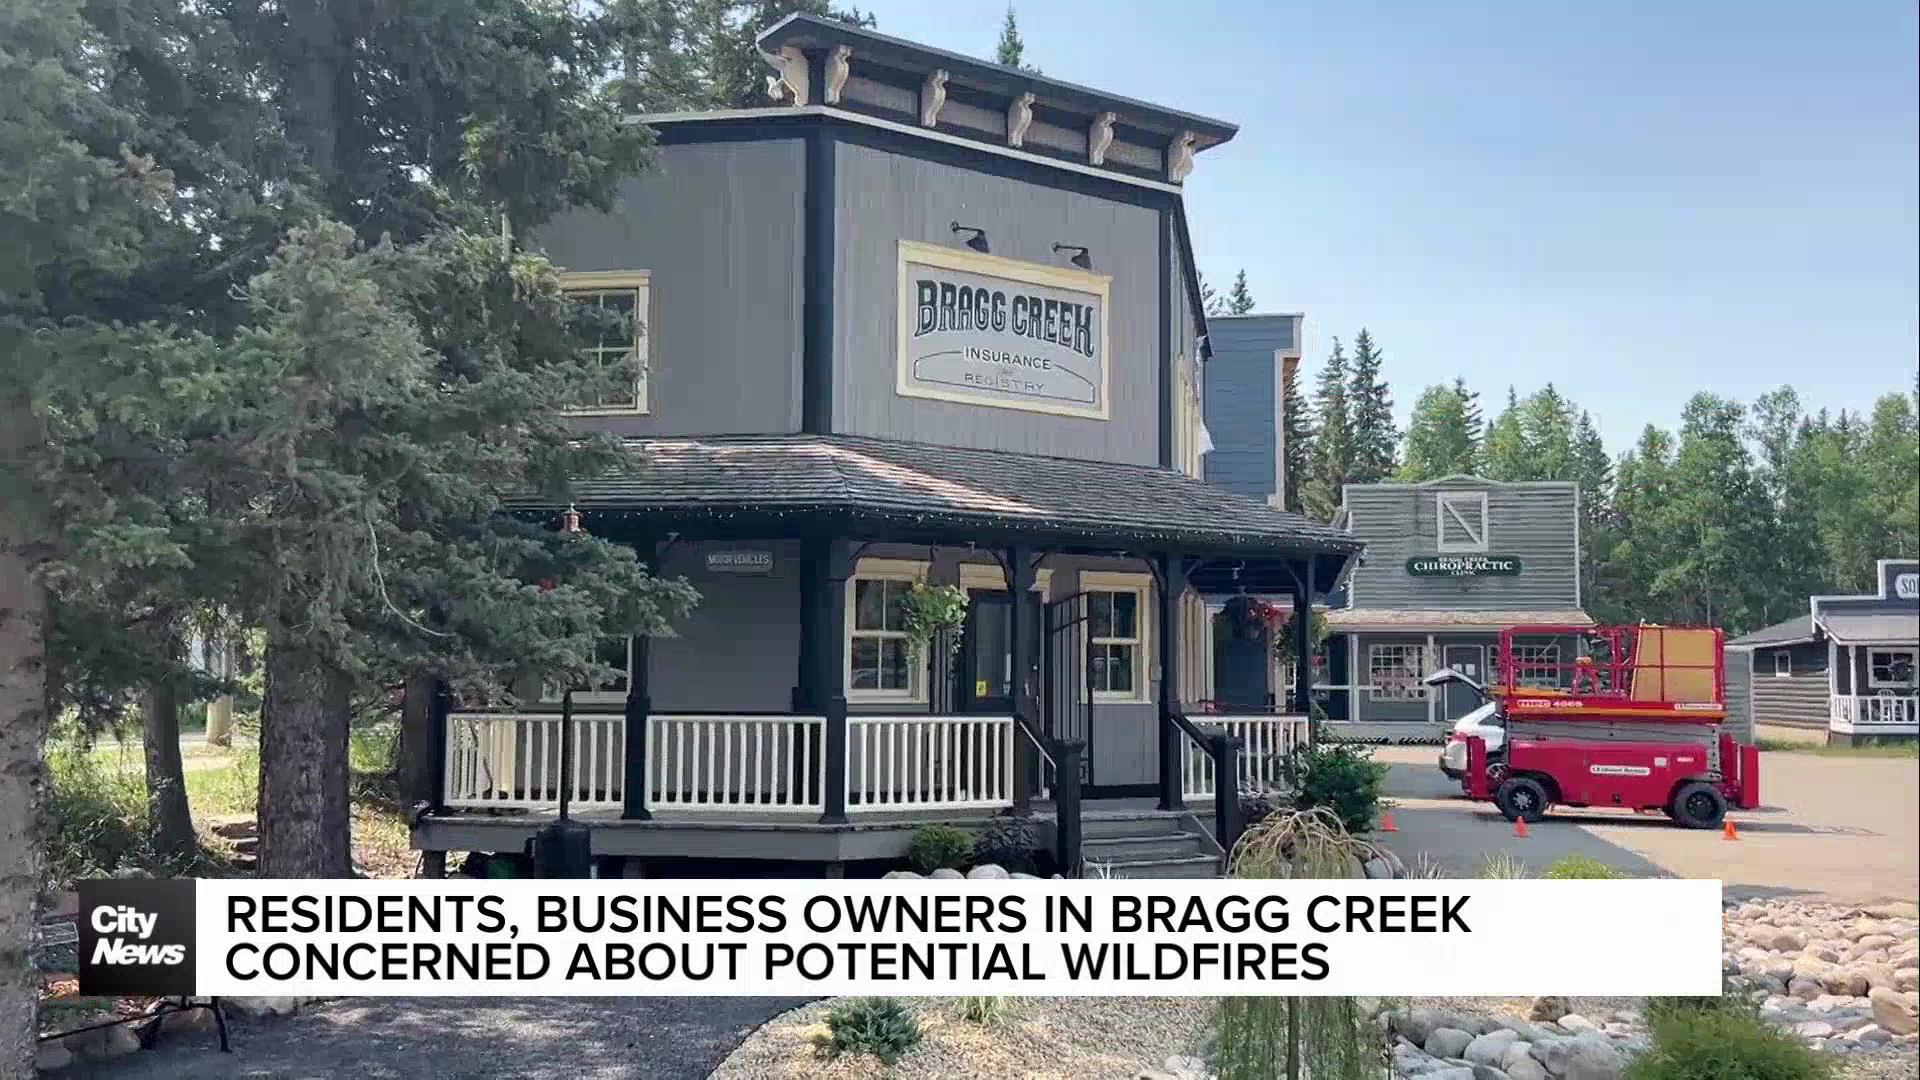 Residents, business owners in Bragg Creek concerned about potential wildfires